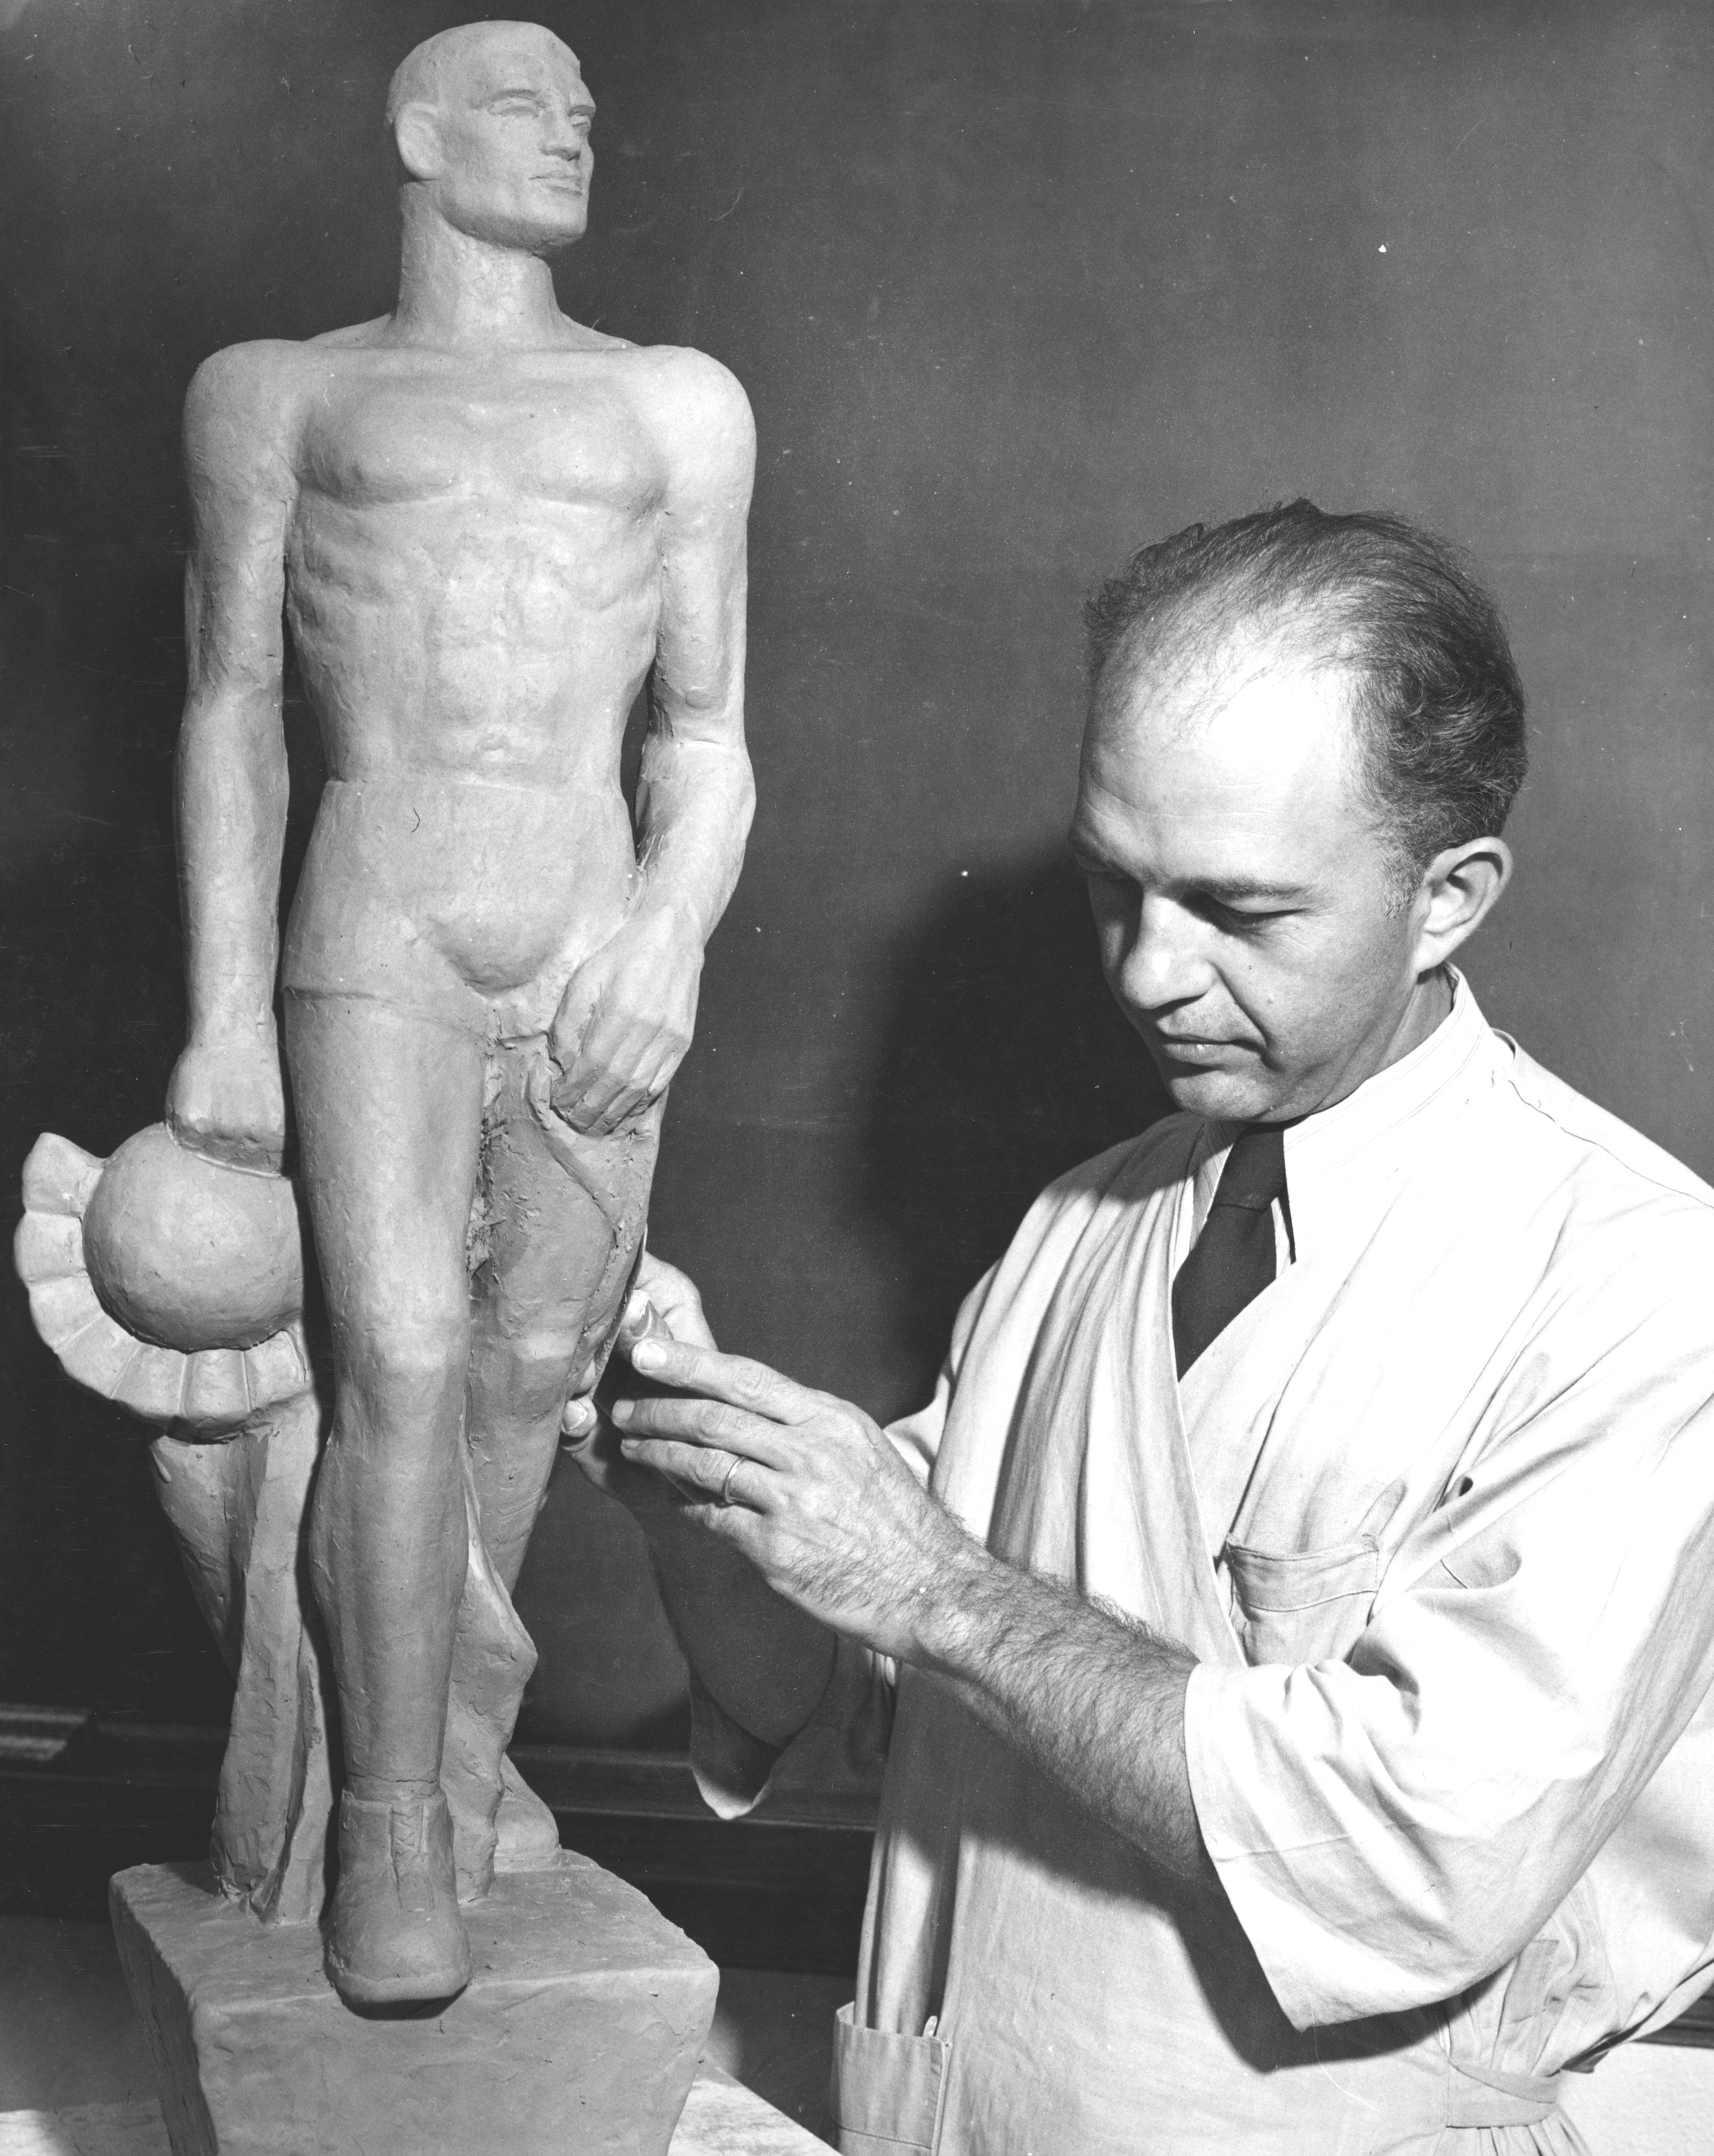 Leonard Jungwirth and Sparty model, circa 1944